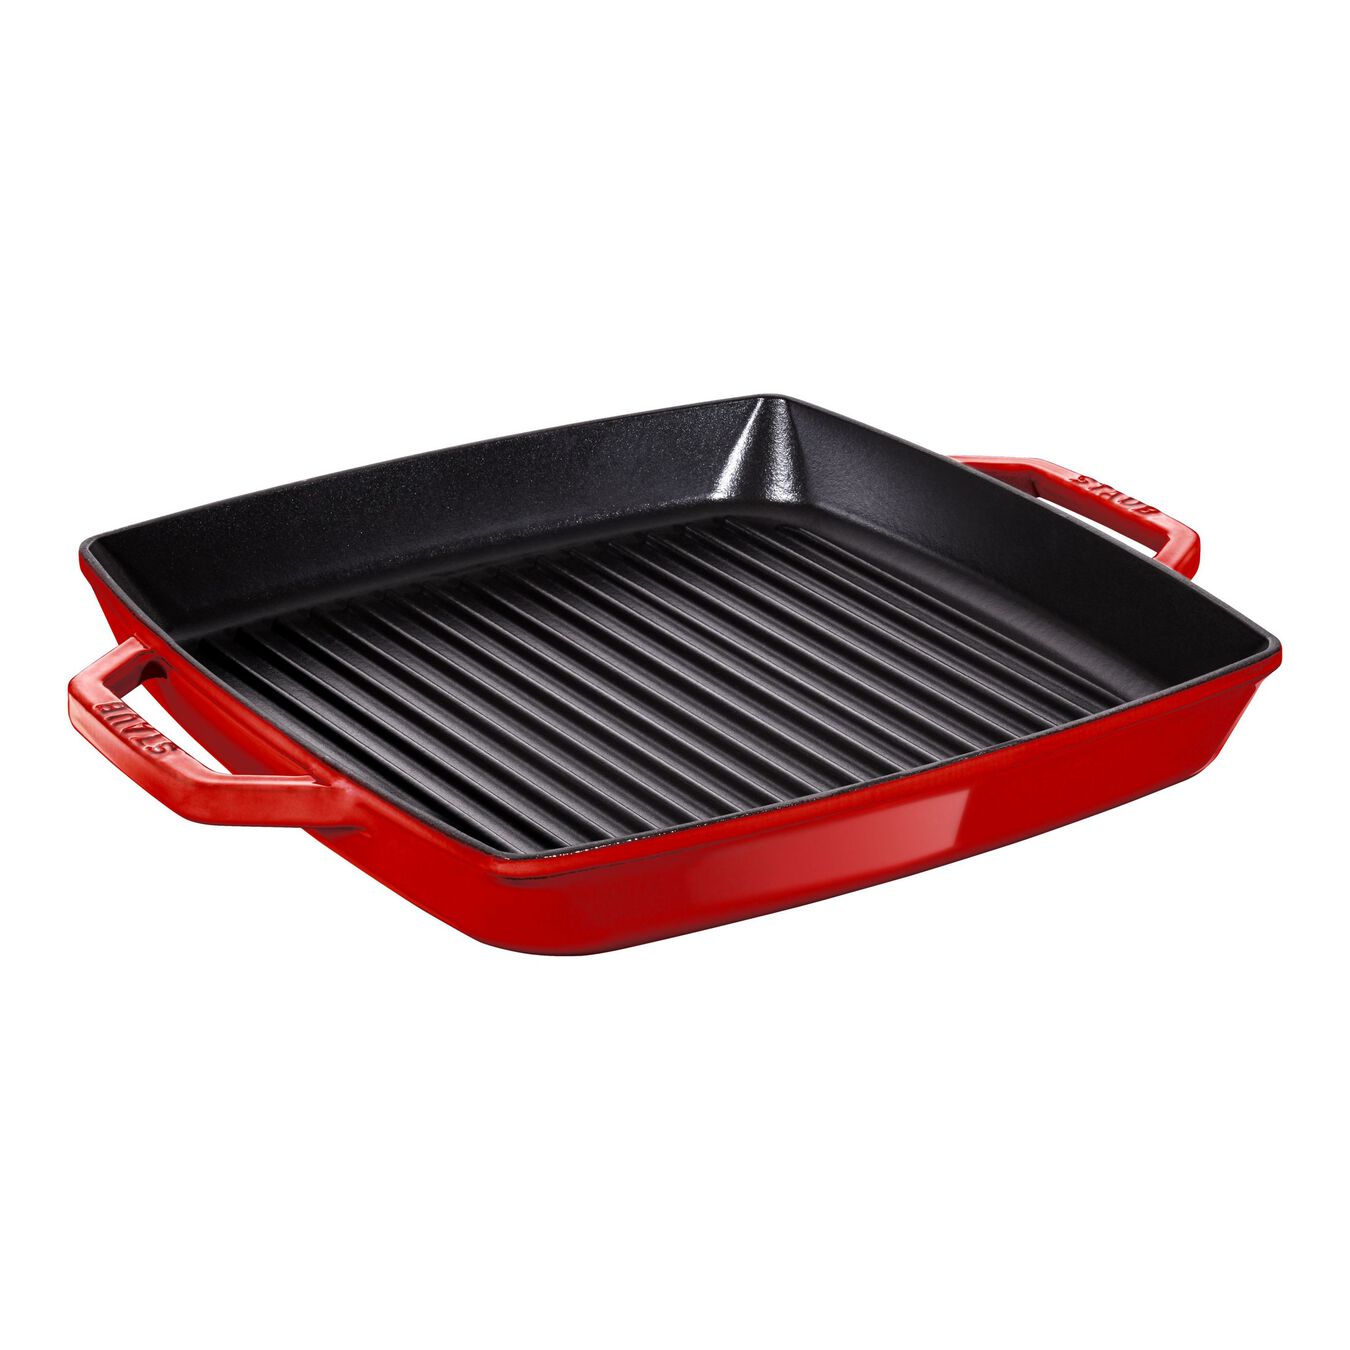 28 cm / 11 inch cast iron square Grill pan, cherry,,large 1